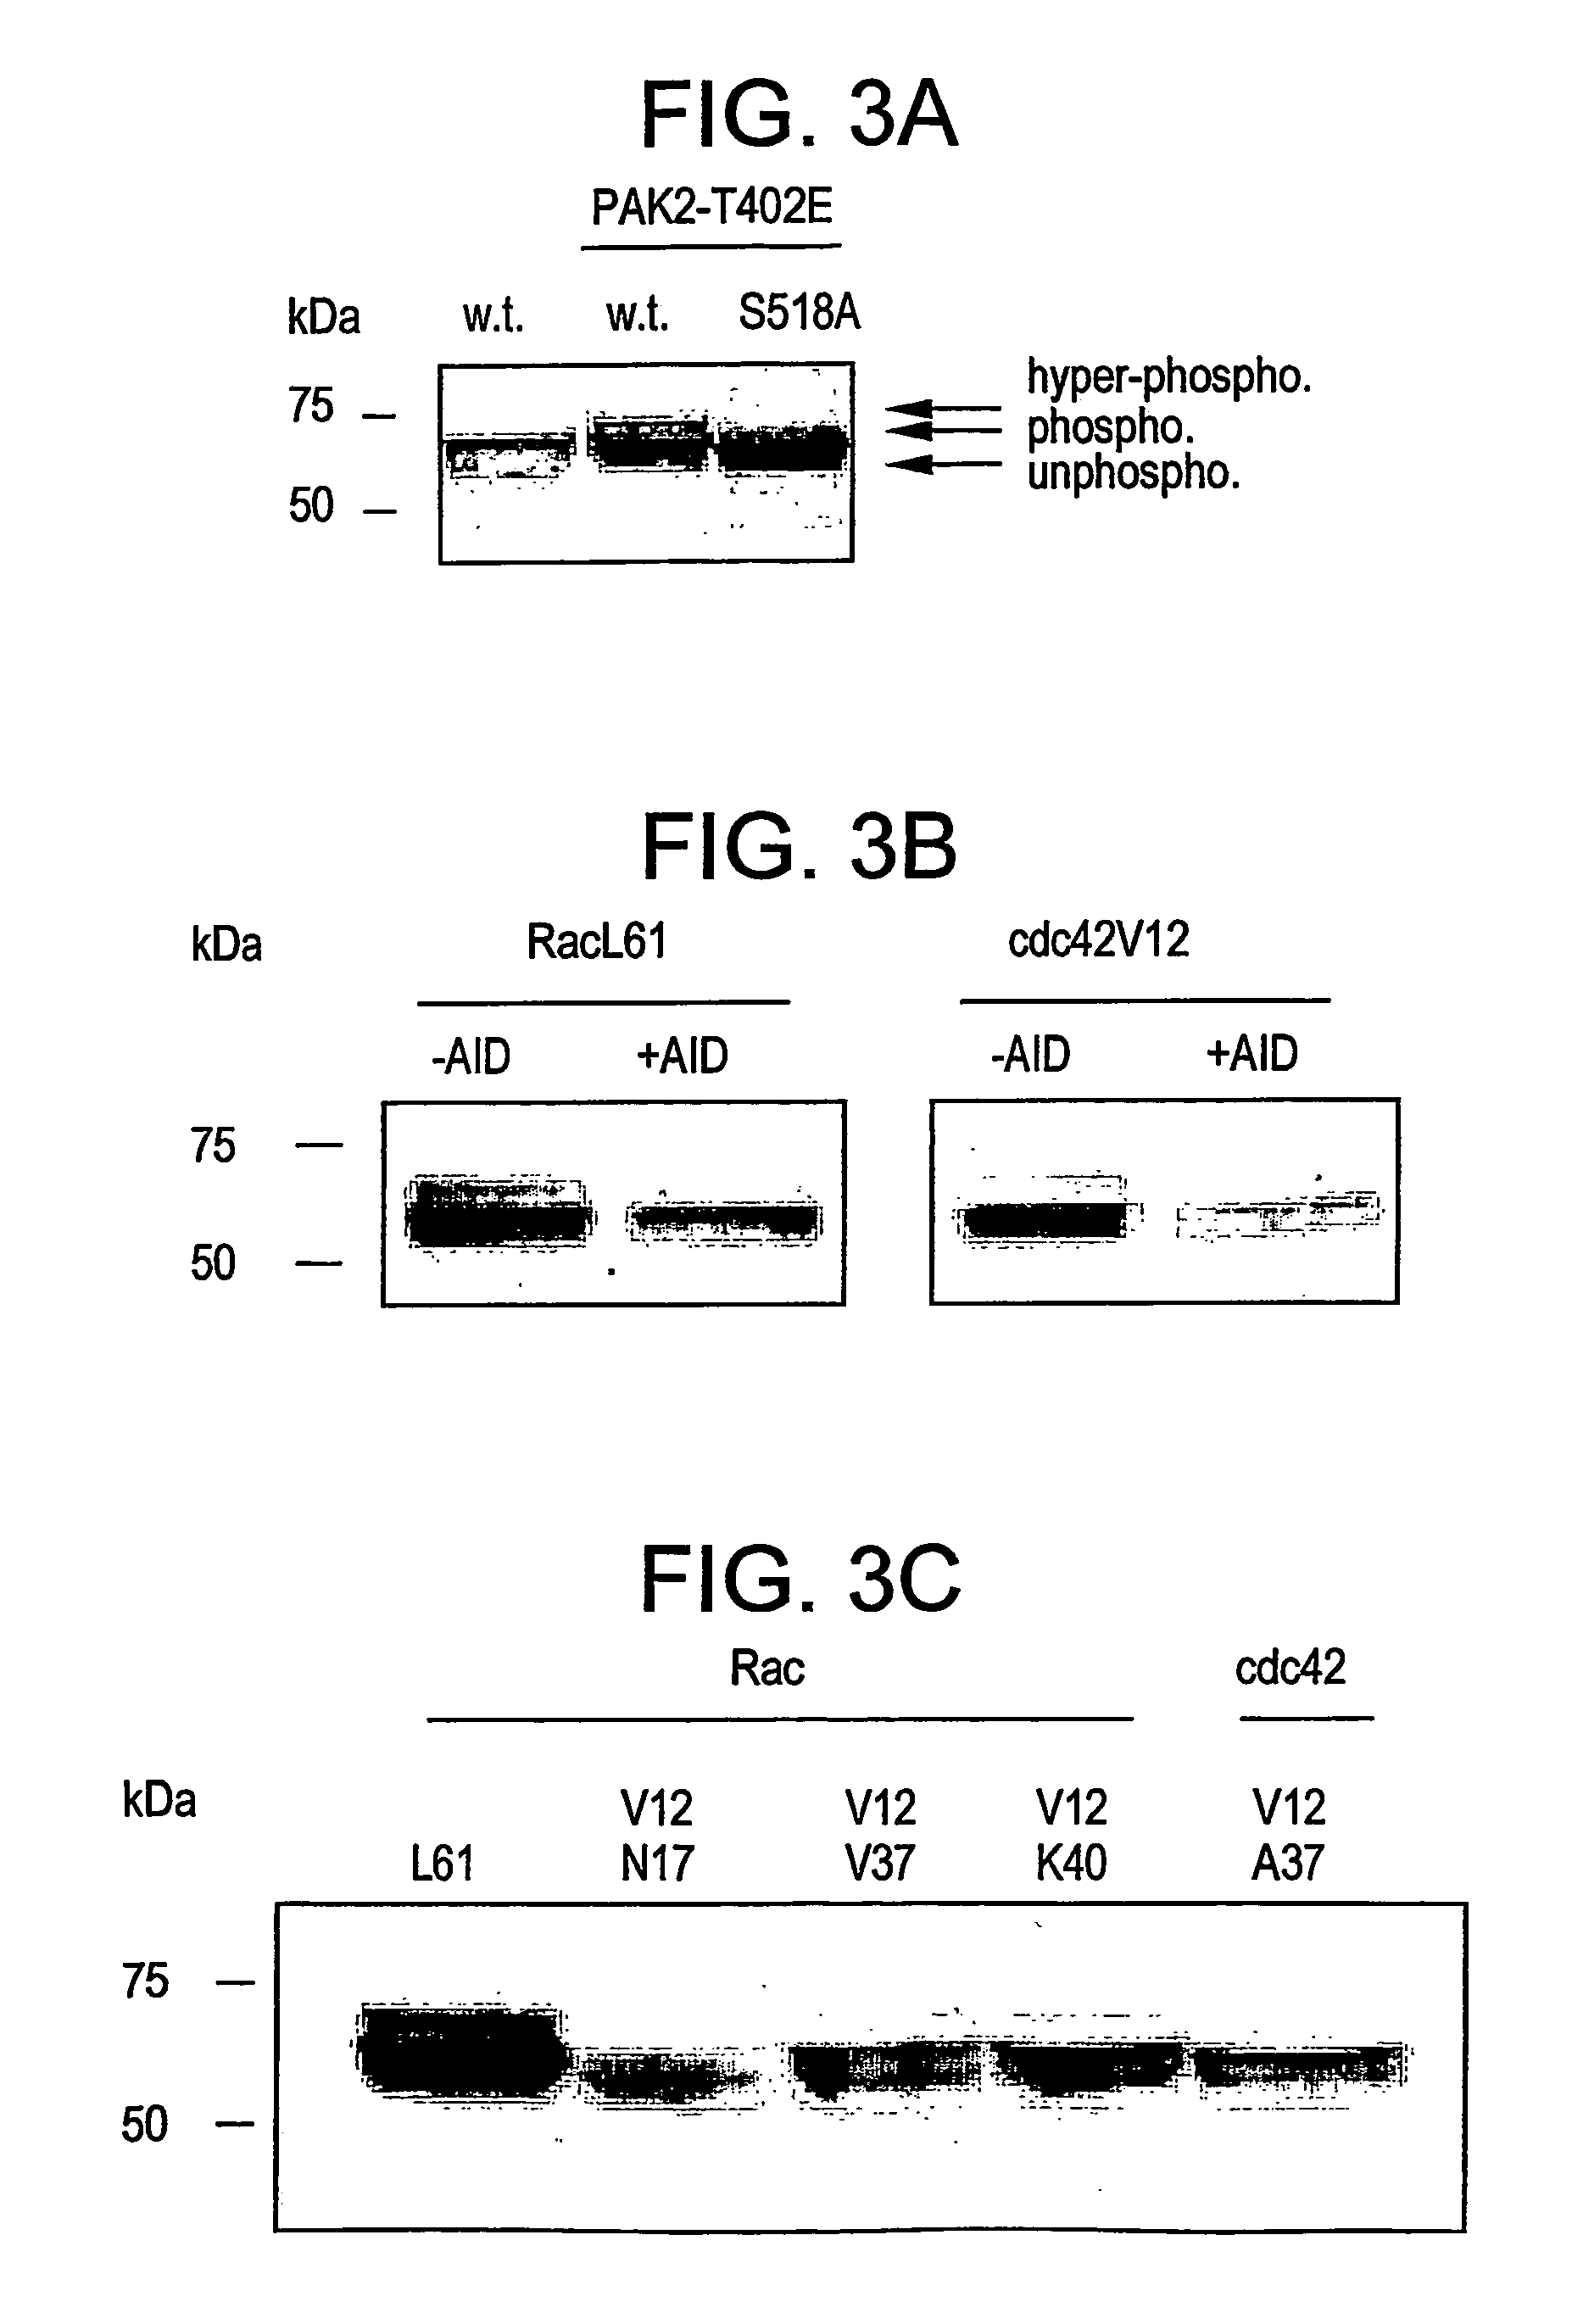 Methods of screening for compounds that decrease phosphorylation of merlin and may be useful in cancer treatment